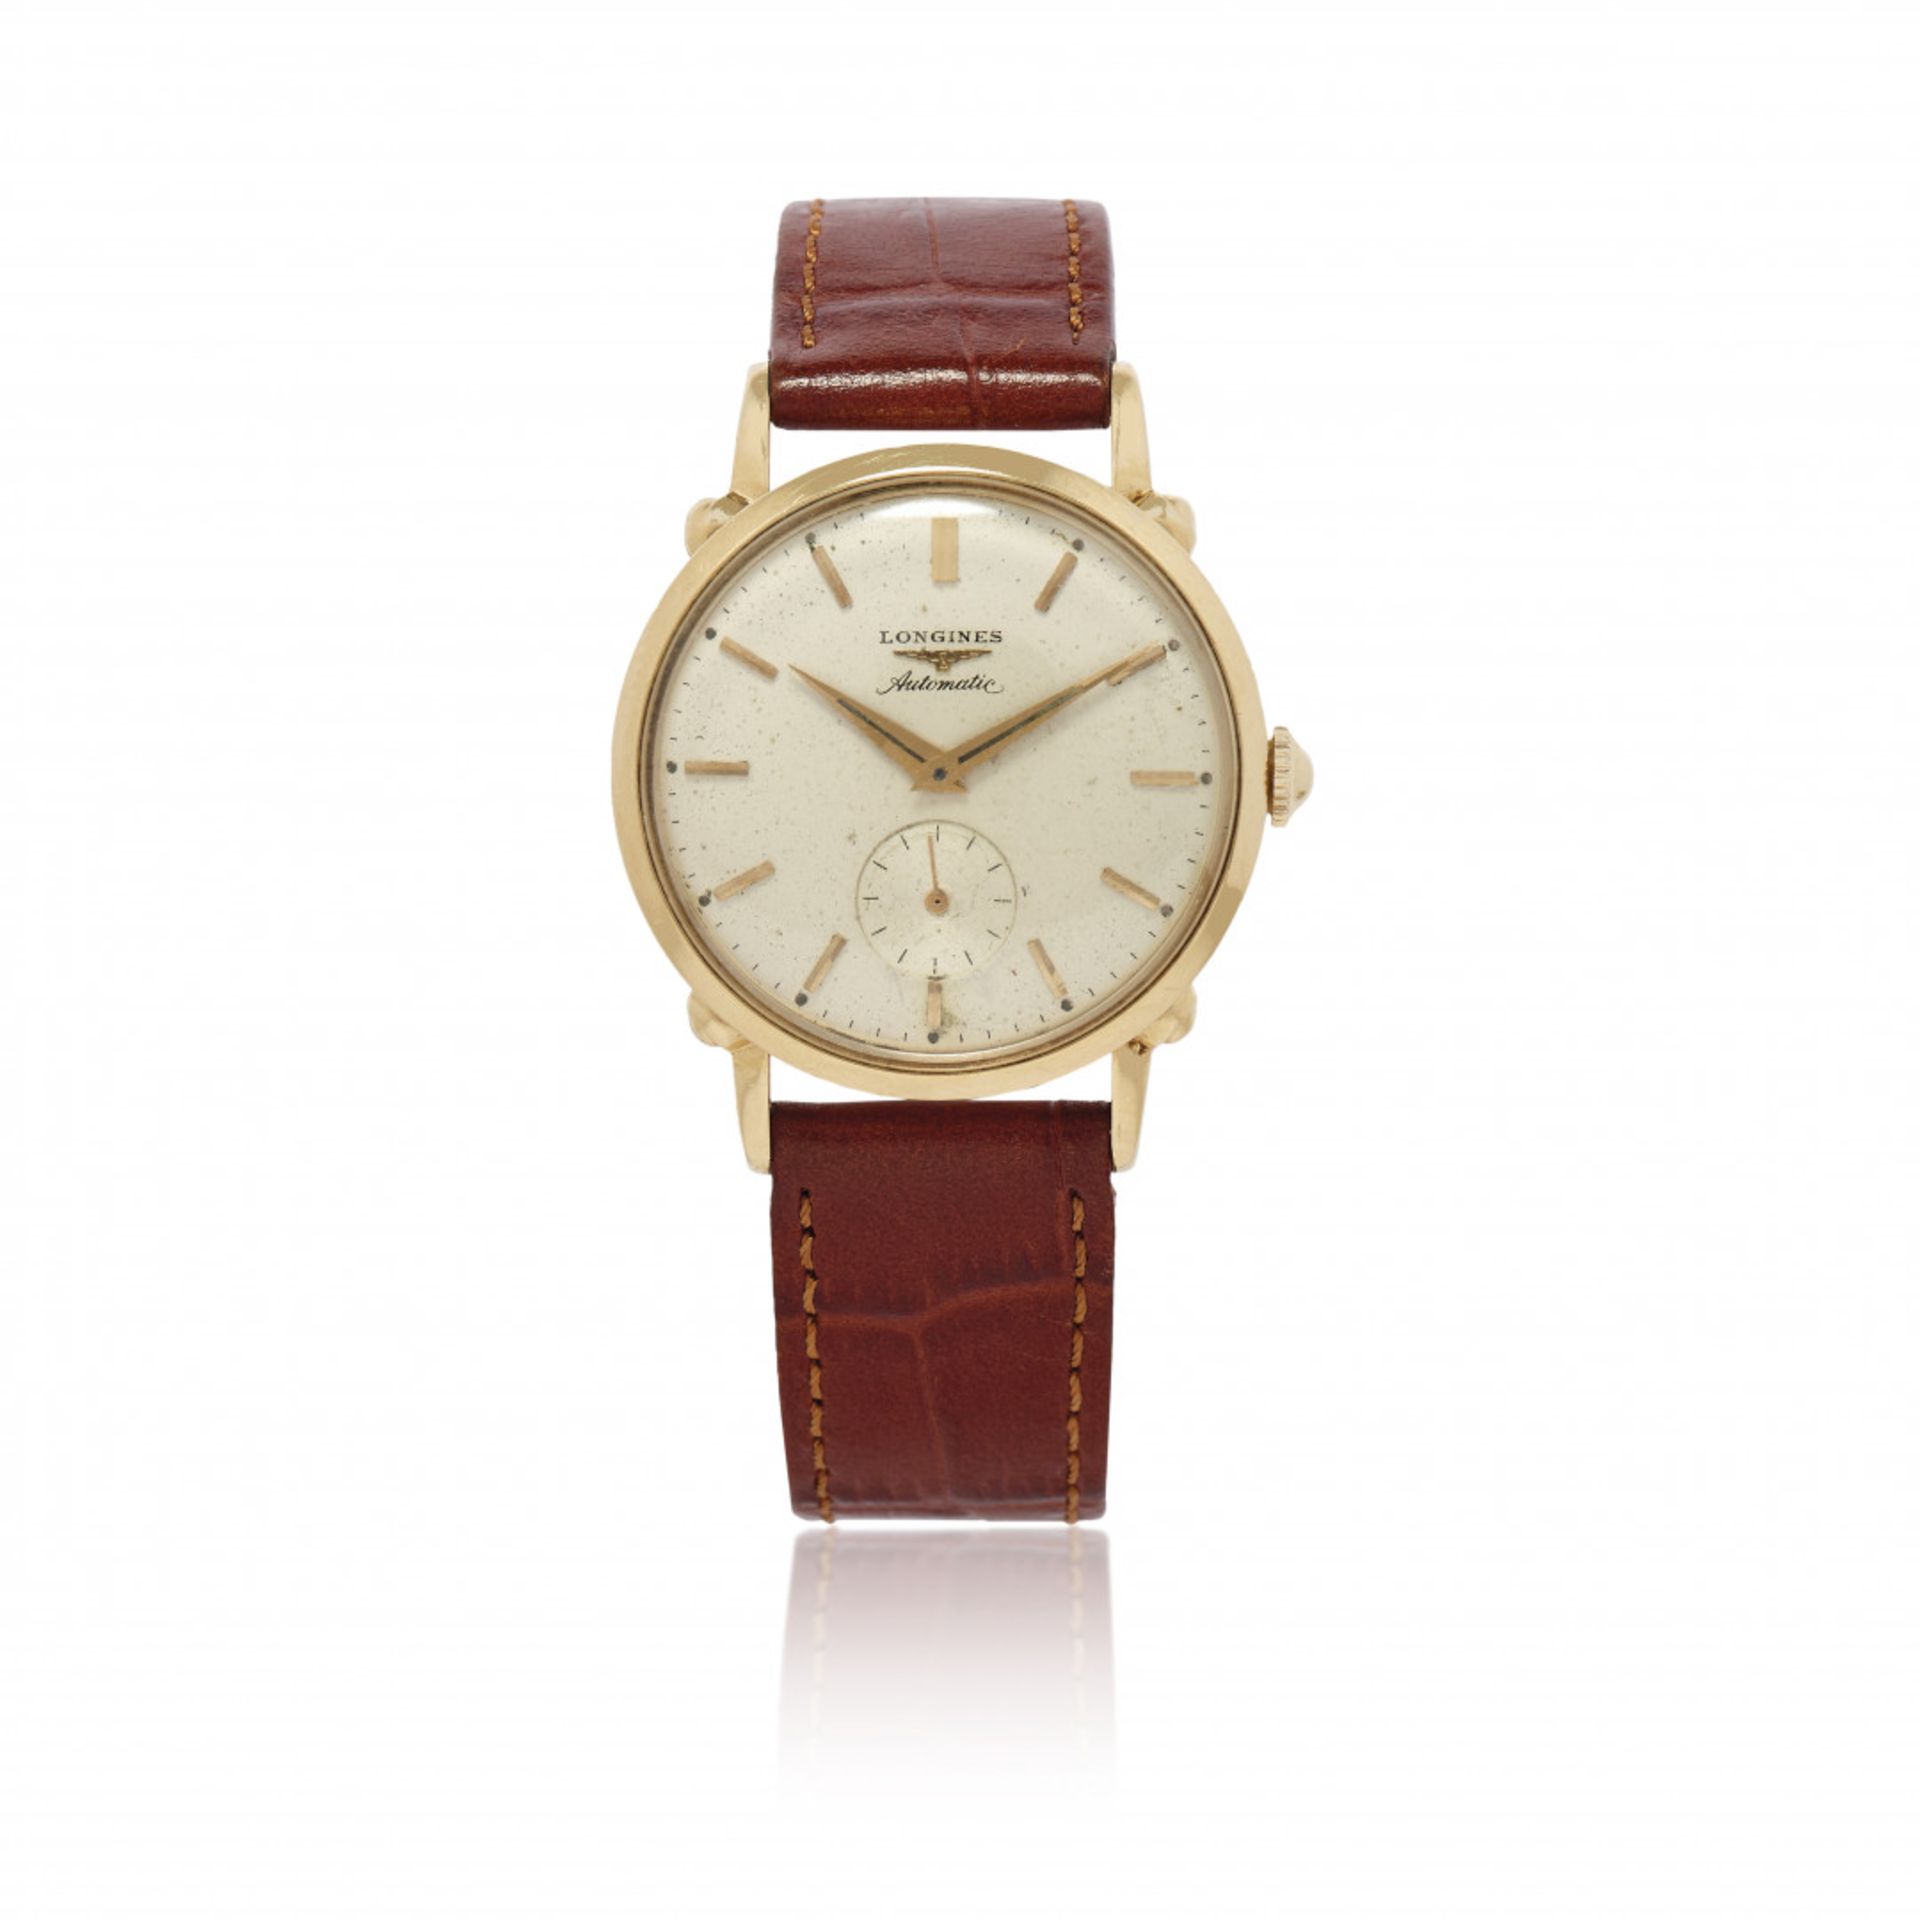 LONGINES AUTOMATIC IN GOLD, CIRCA 1950